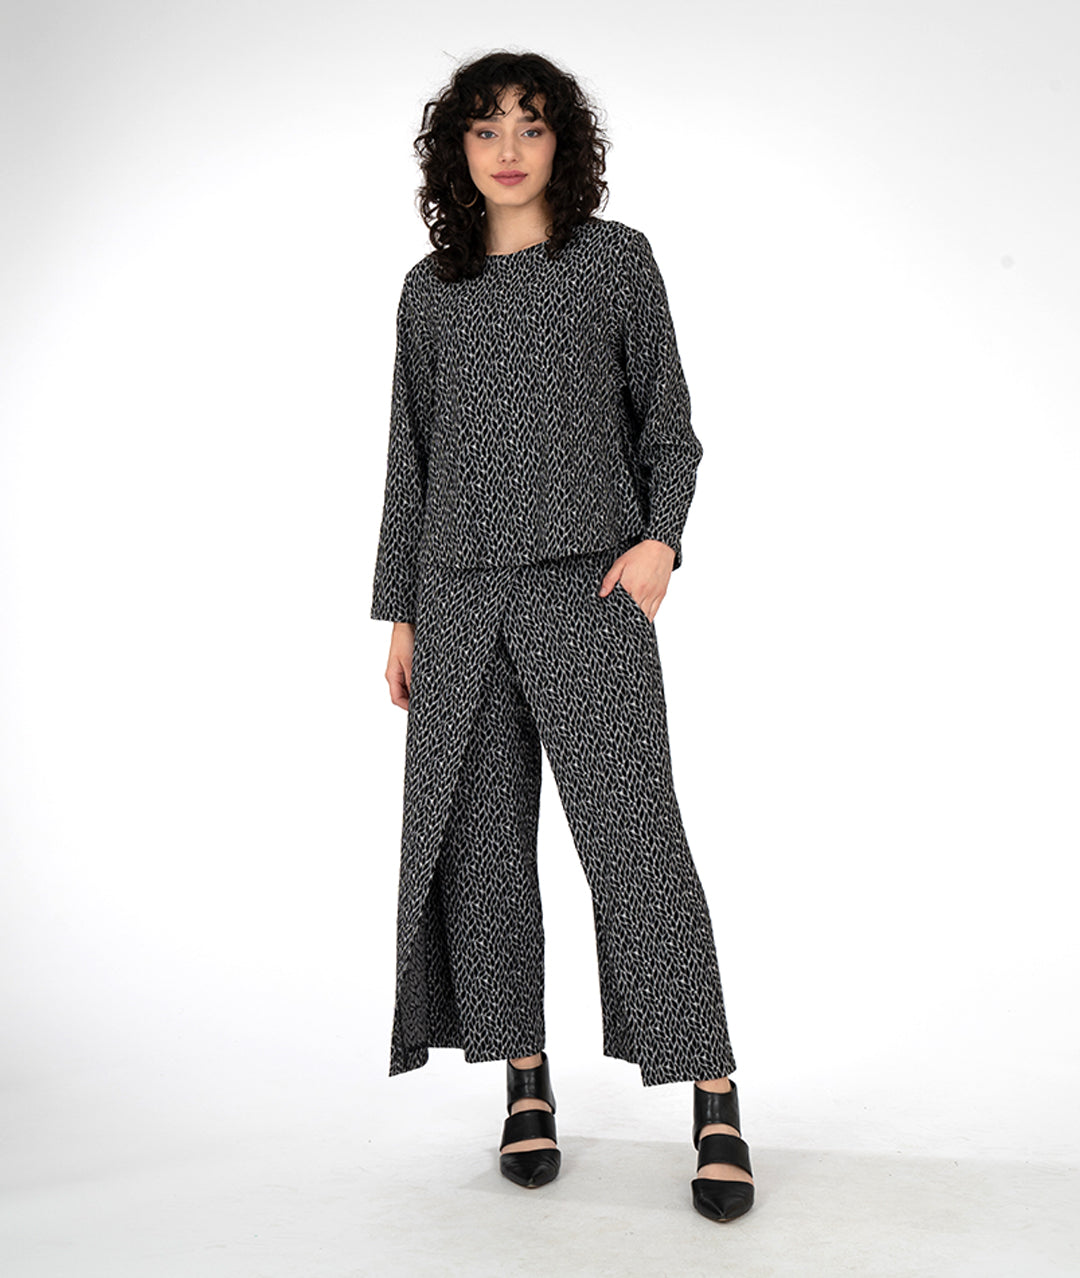 model in a wide leg grey and black leaf print pant with an overlapping front, worn with a matching pullover top with long sleeves and a high round neckline